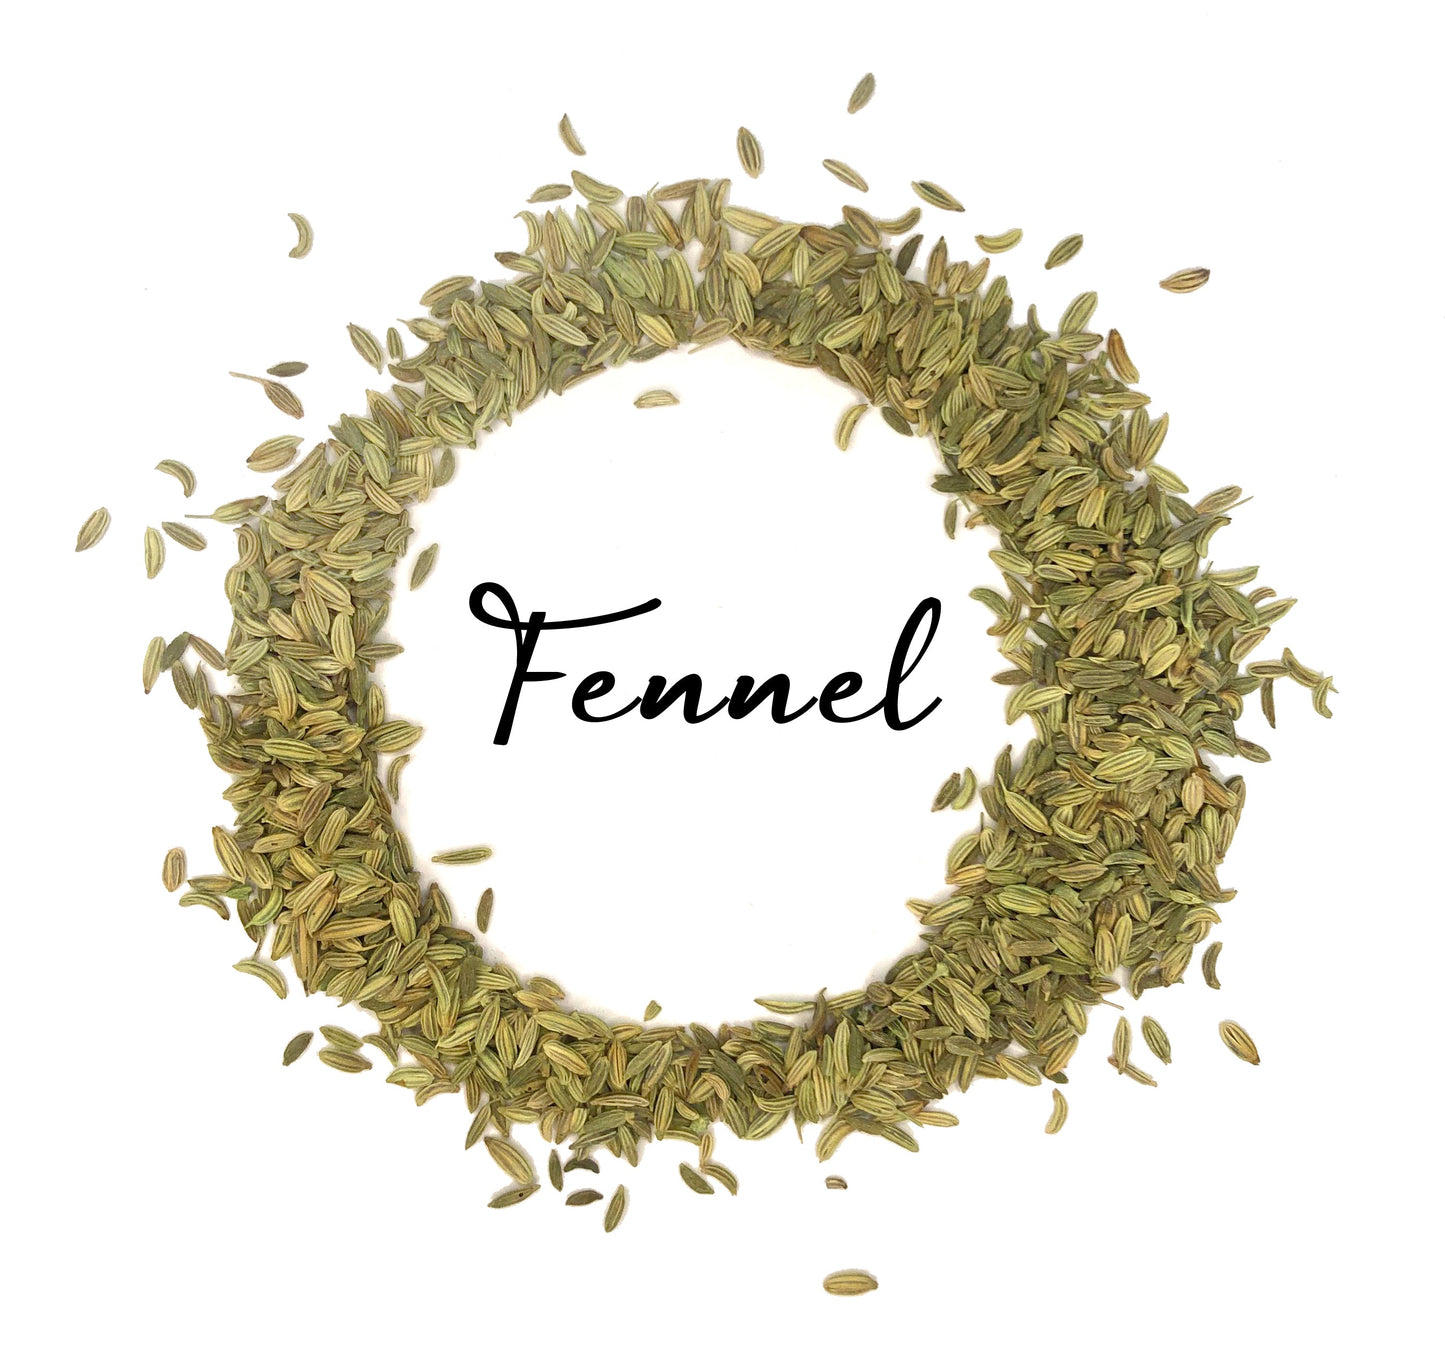 Wholesale Spices & Herbs - Fennel Seed Whole, Organic 3.0oz(85.2g) Jar